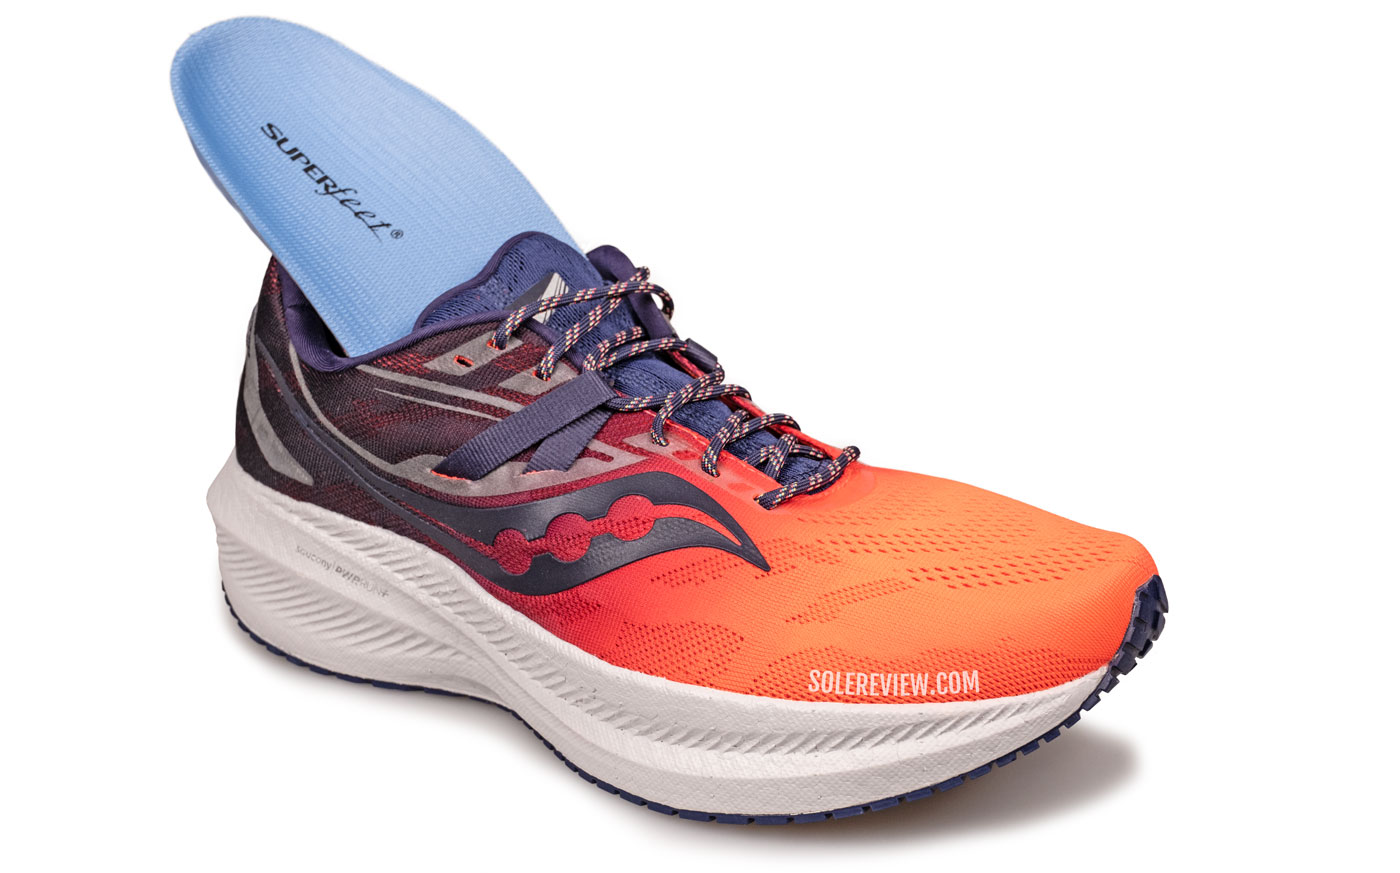 The Saucony Triumph 20 with Superfeet blue insole.